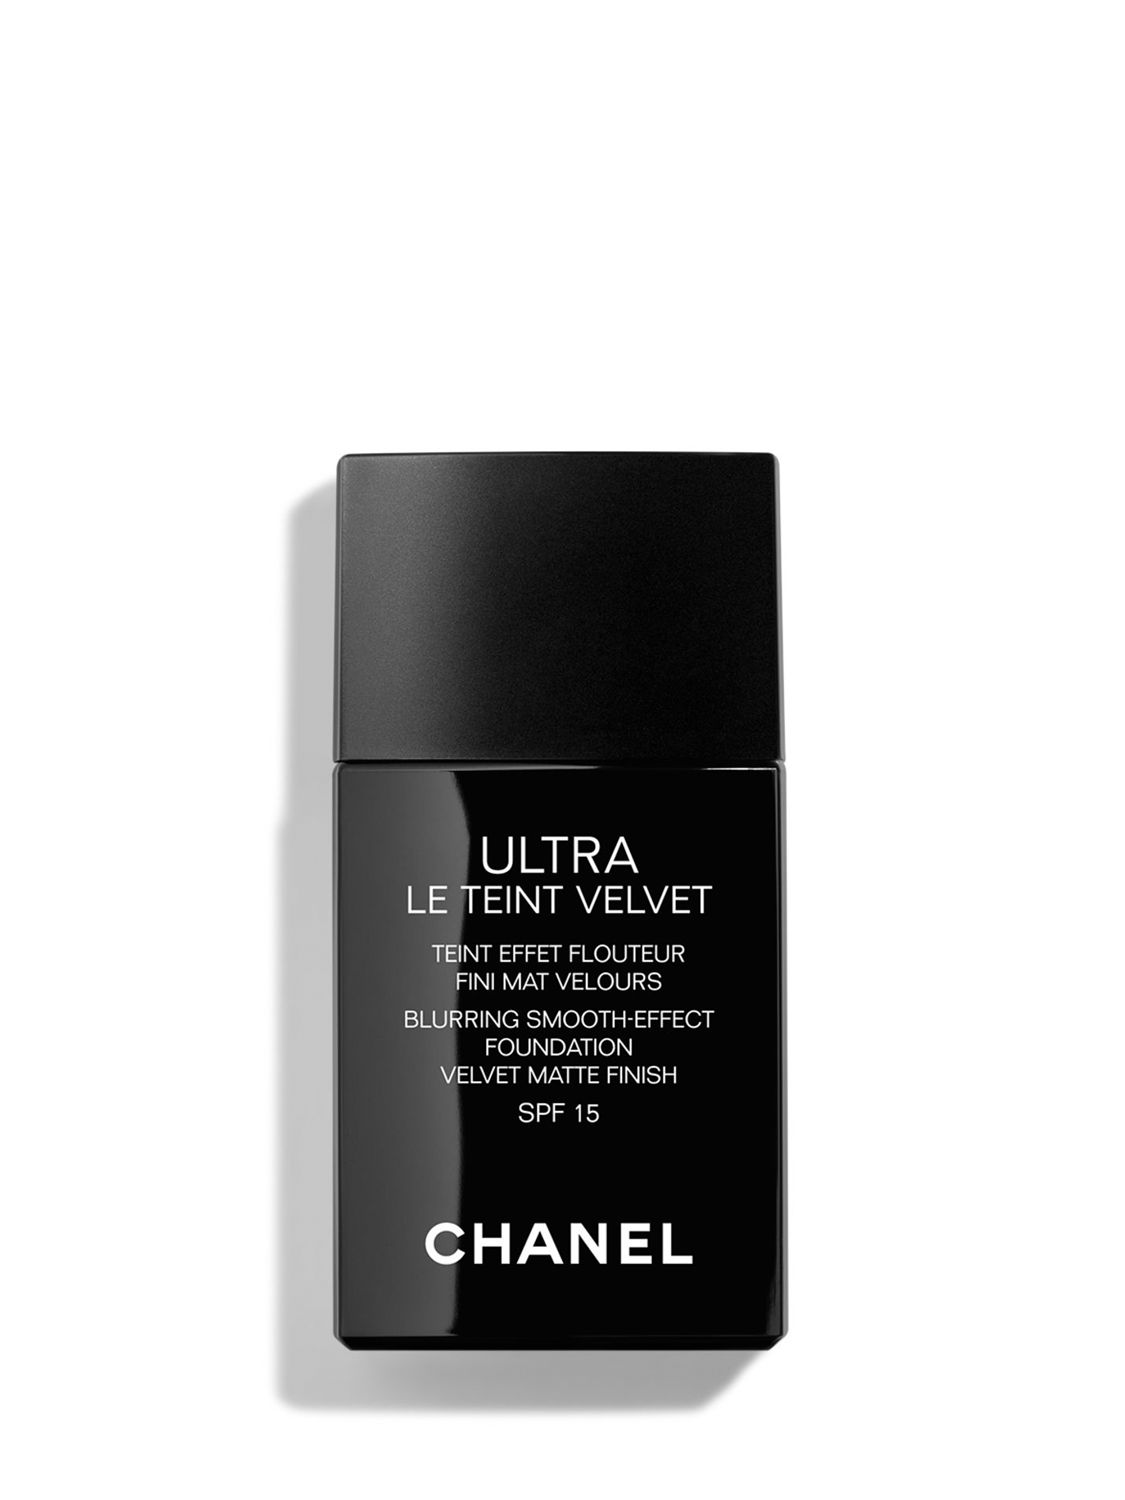 CHANEL Ultra Le Teint Velvet Ultra-Light And Longwearing Formula Blurring Matte Finish Perfect Natural Complexion, 10 Beige 1